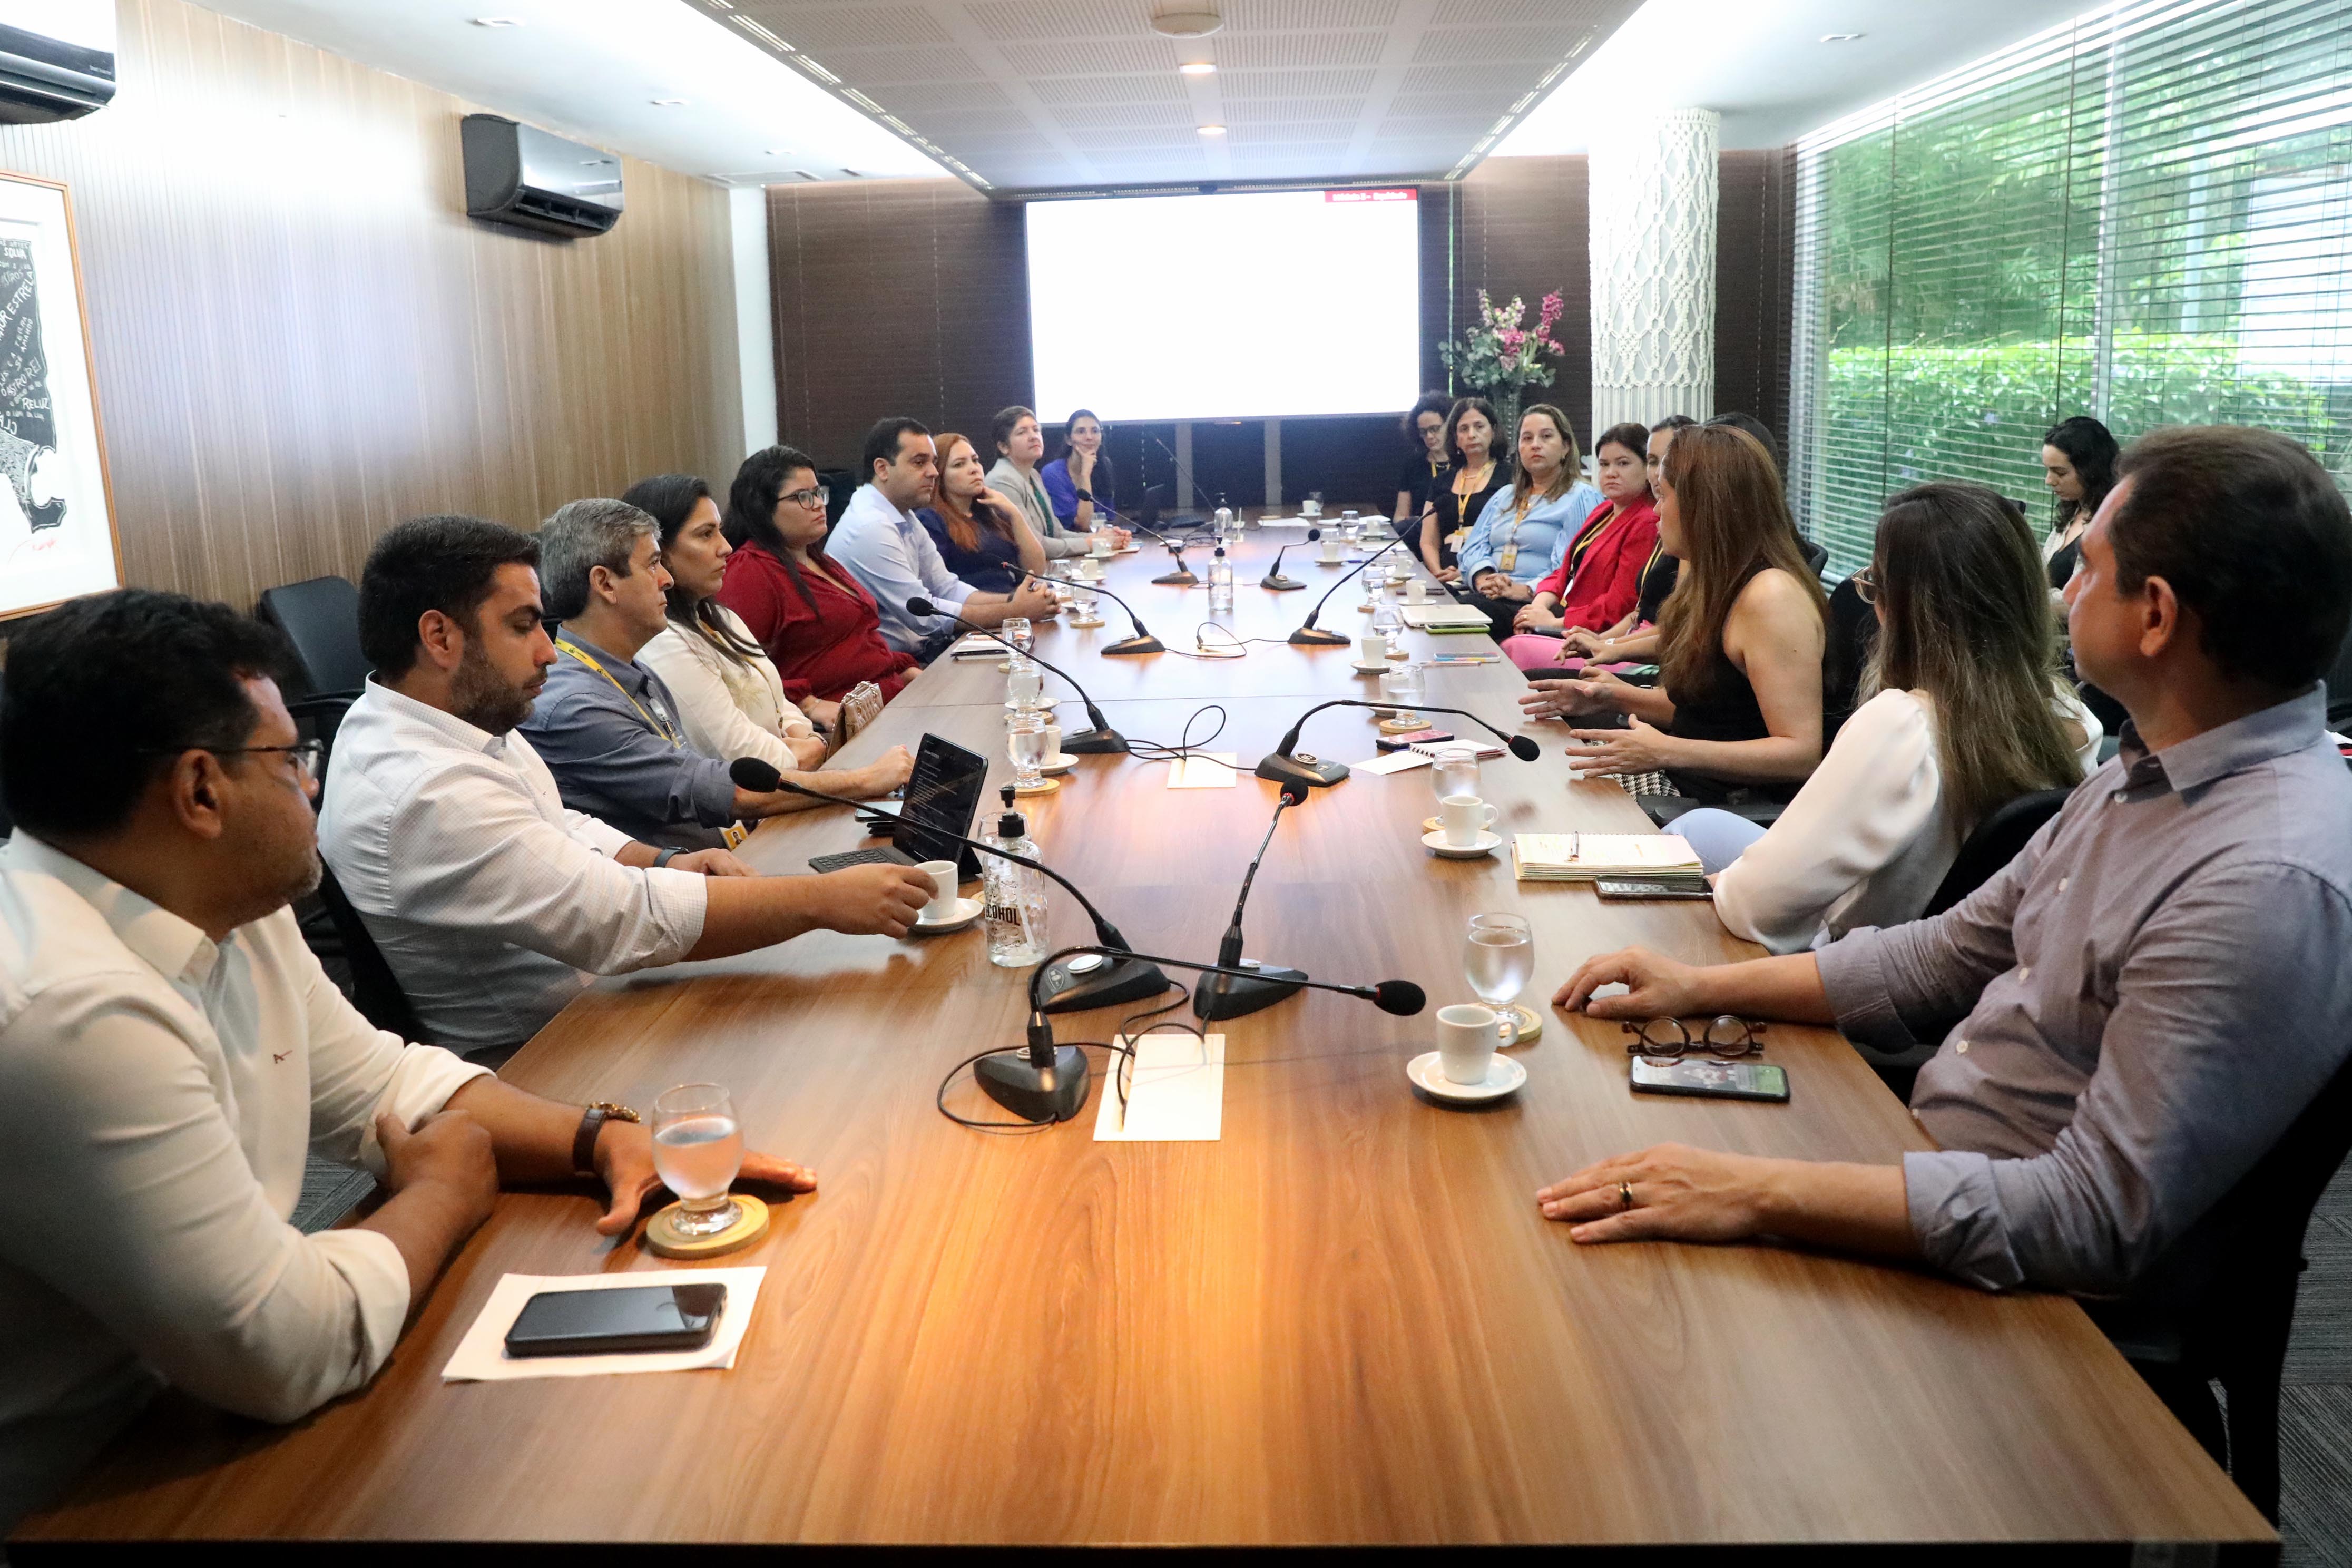 Fortaleza City Hall received a visit from the Public Procurement team of the Bloomberg Philanthropy “City Data Alliance” Program